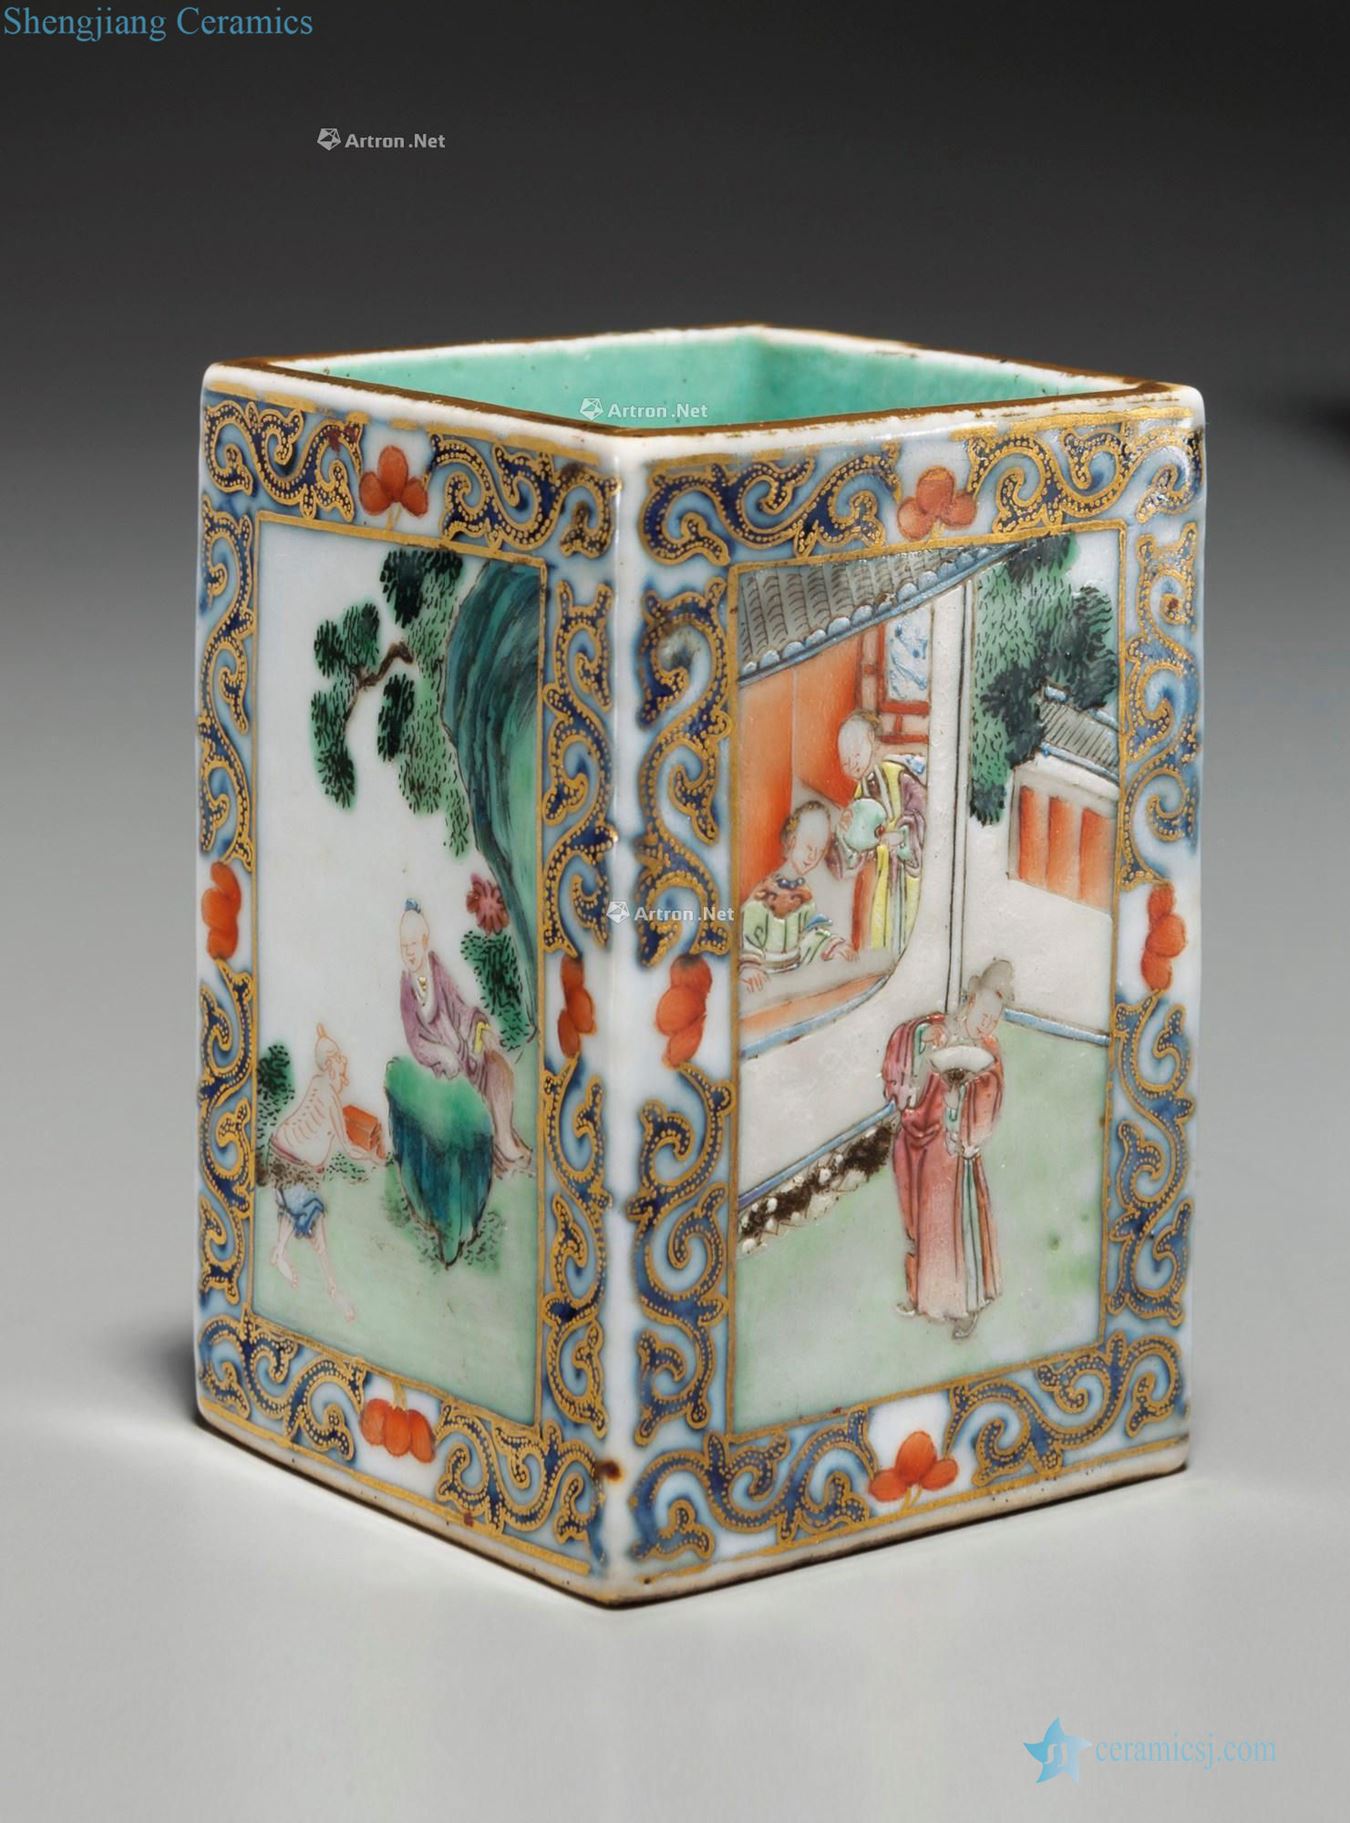 Qianlong period (1736-1795), A SMALL FAMILLE ROSE AND GILT - DECORATED SQUARE BRUSH POT